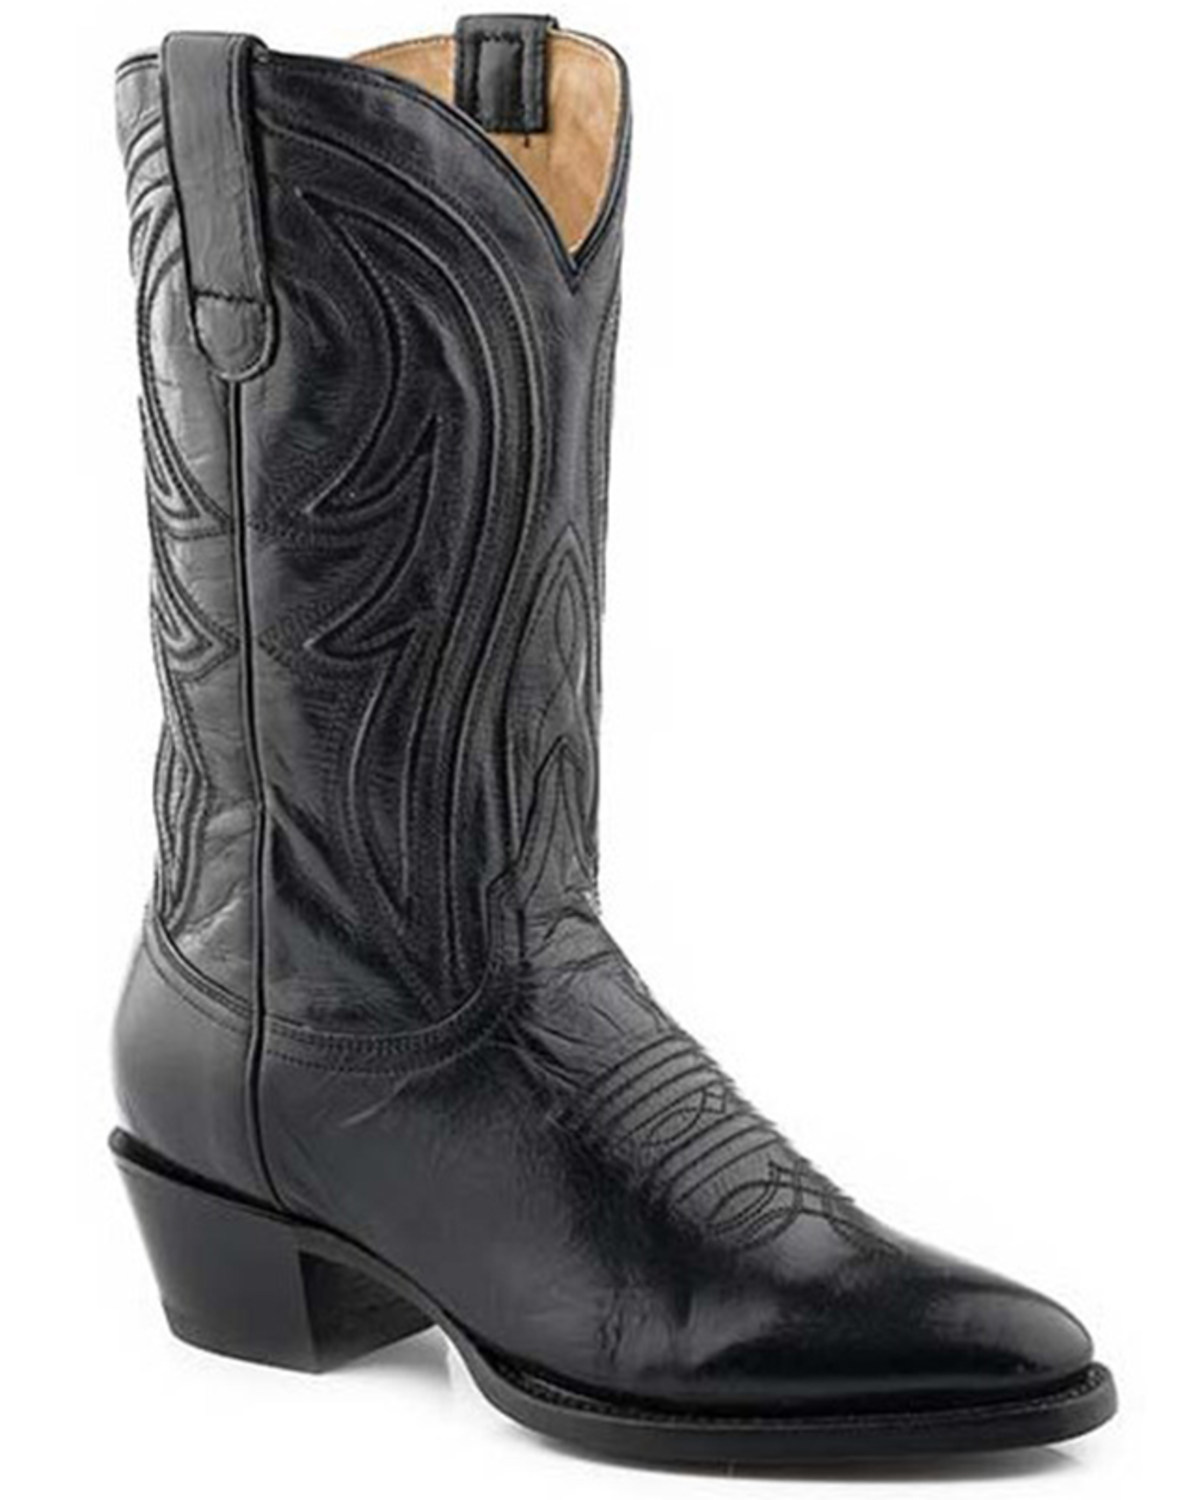 Stetson Women's Nora Western Boots - Pointed Toe